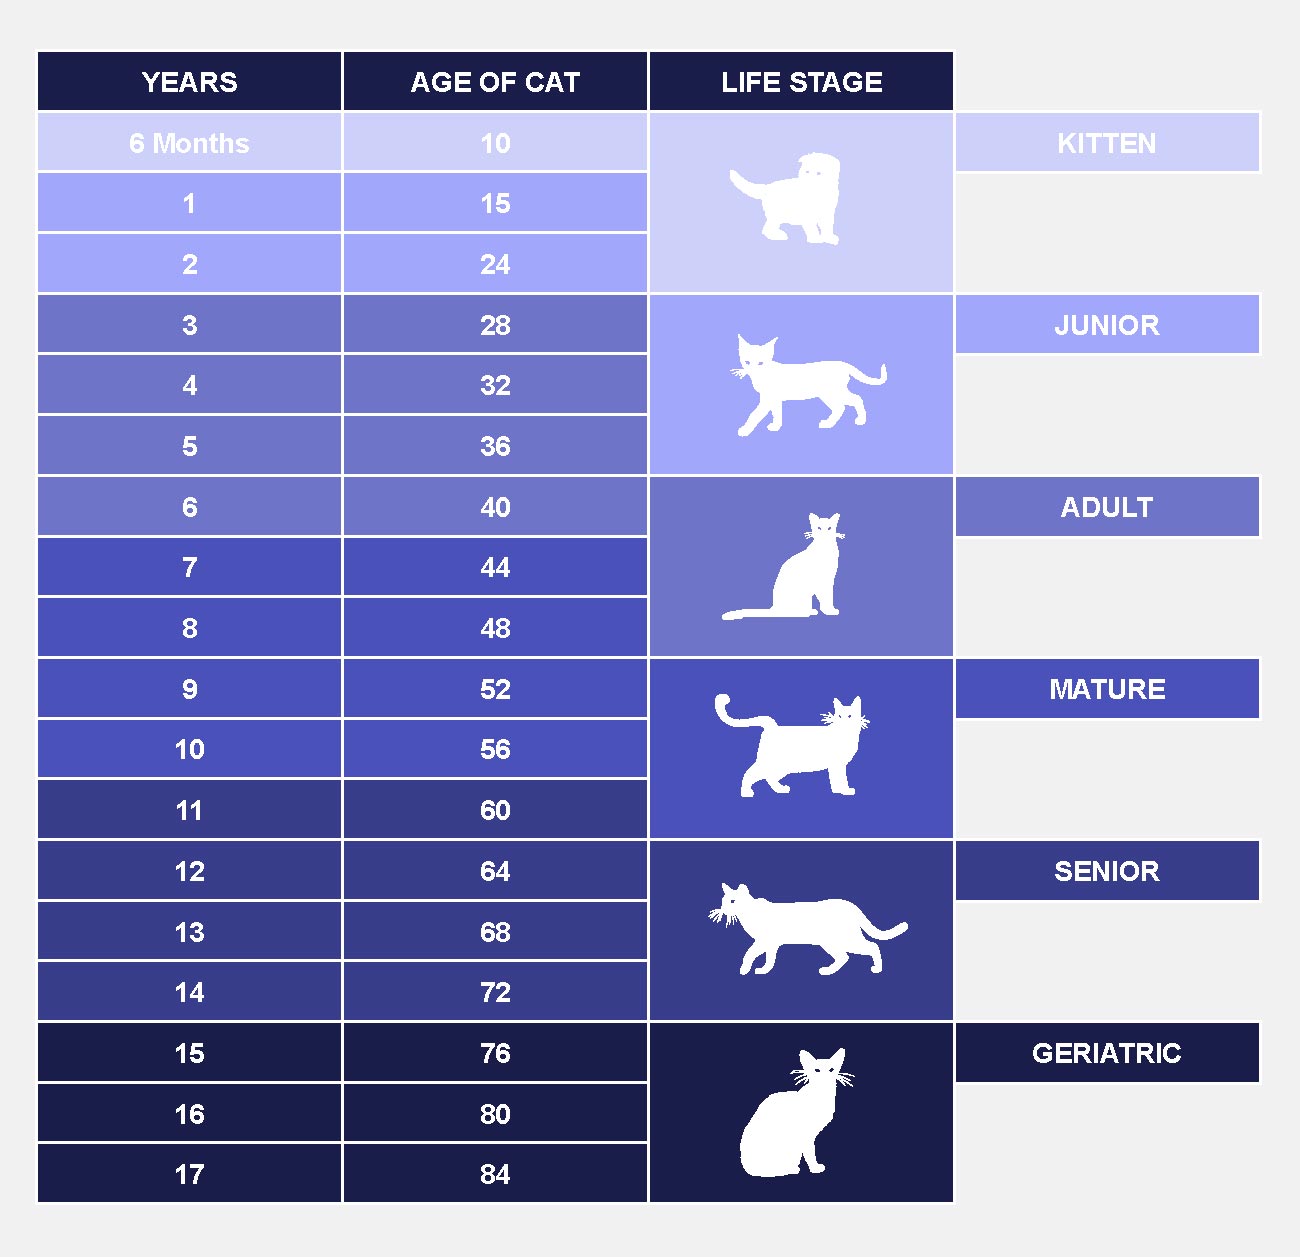 How old is your cat in human years